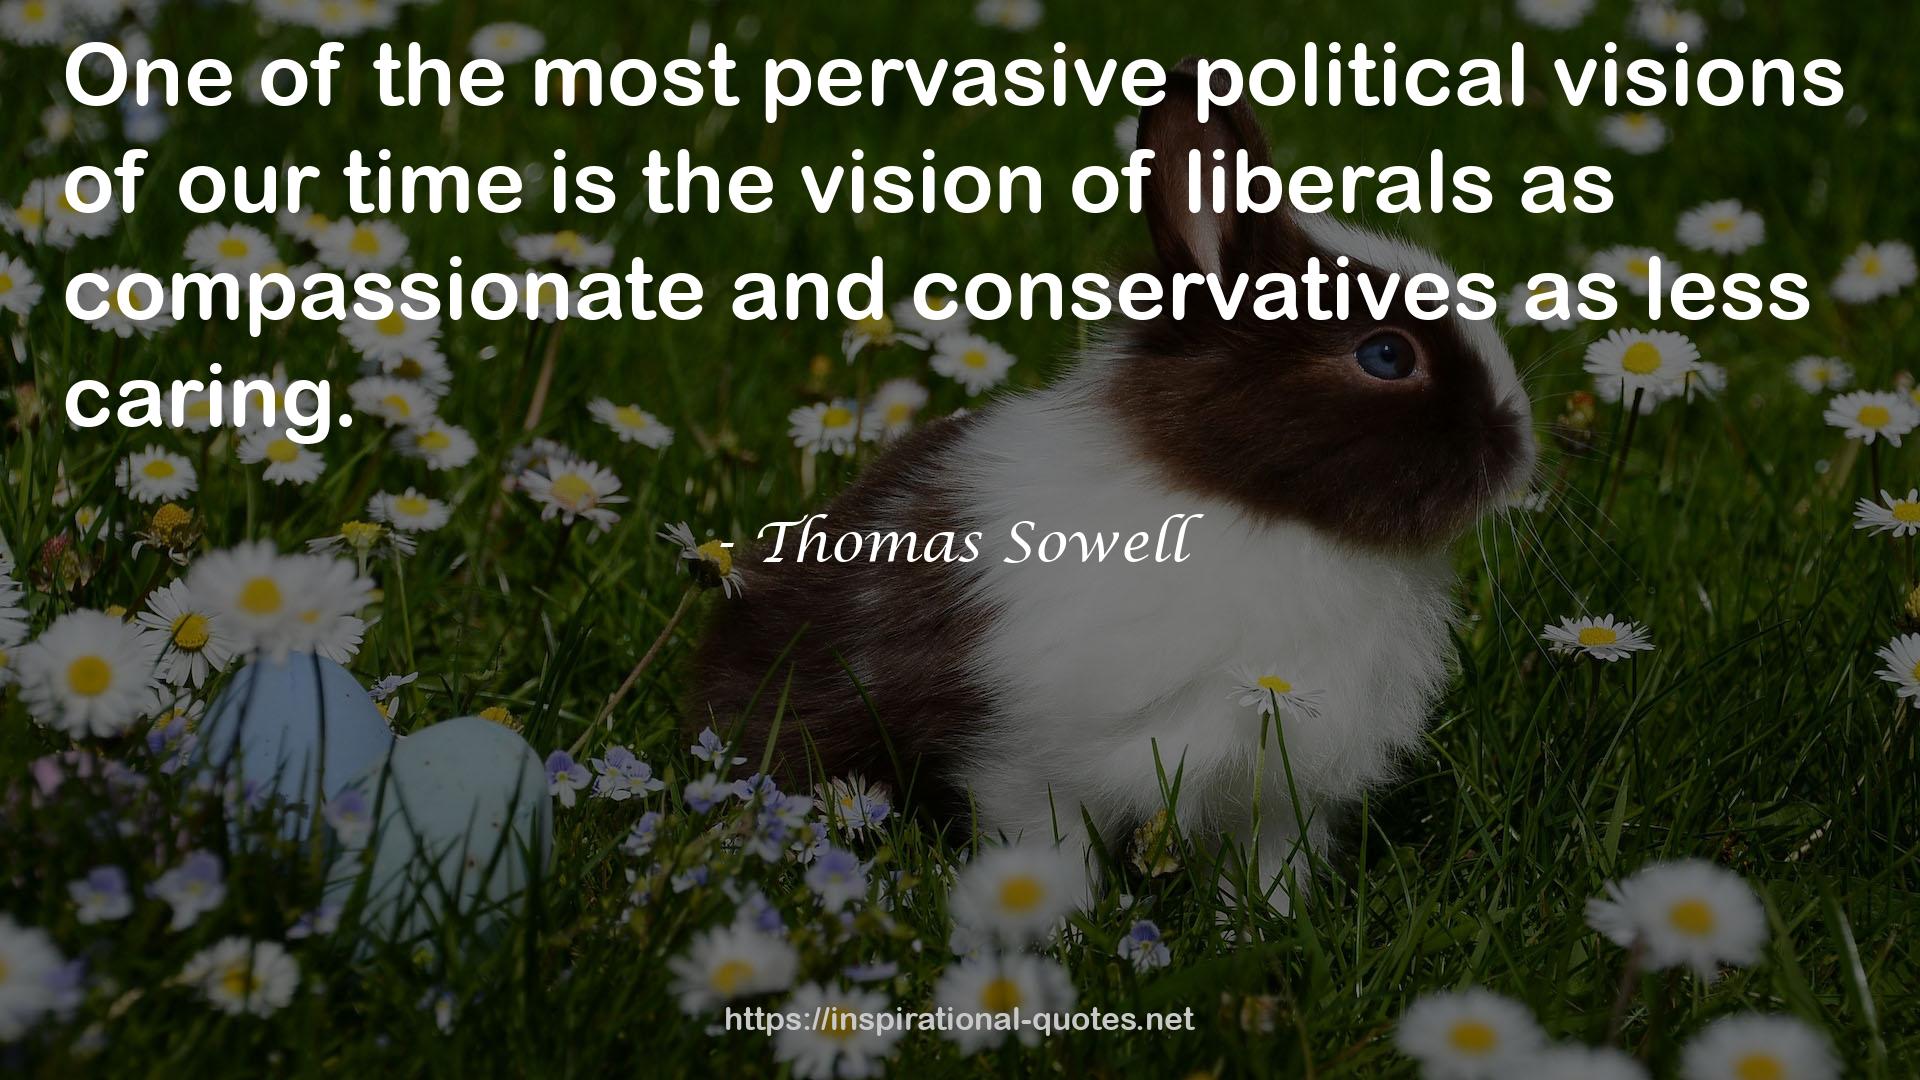 the most pervasive political visions  QUOTES